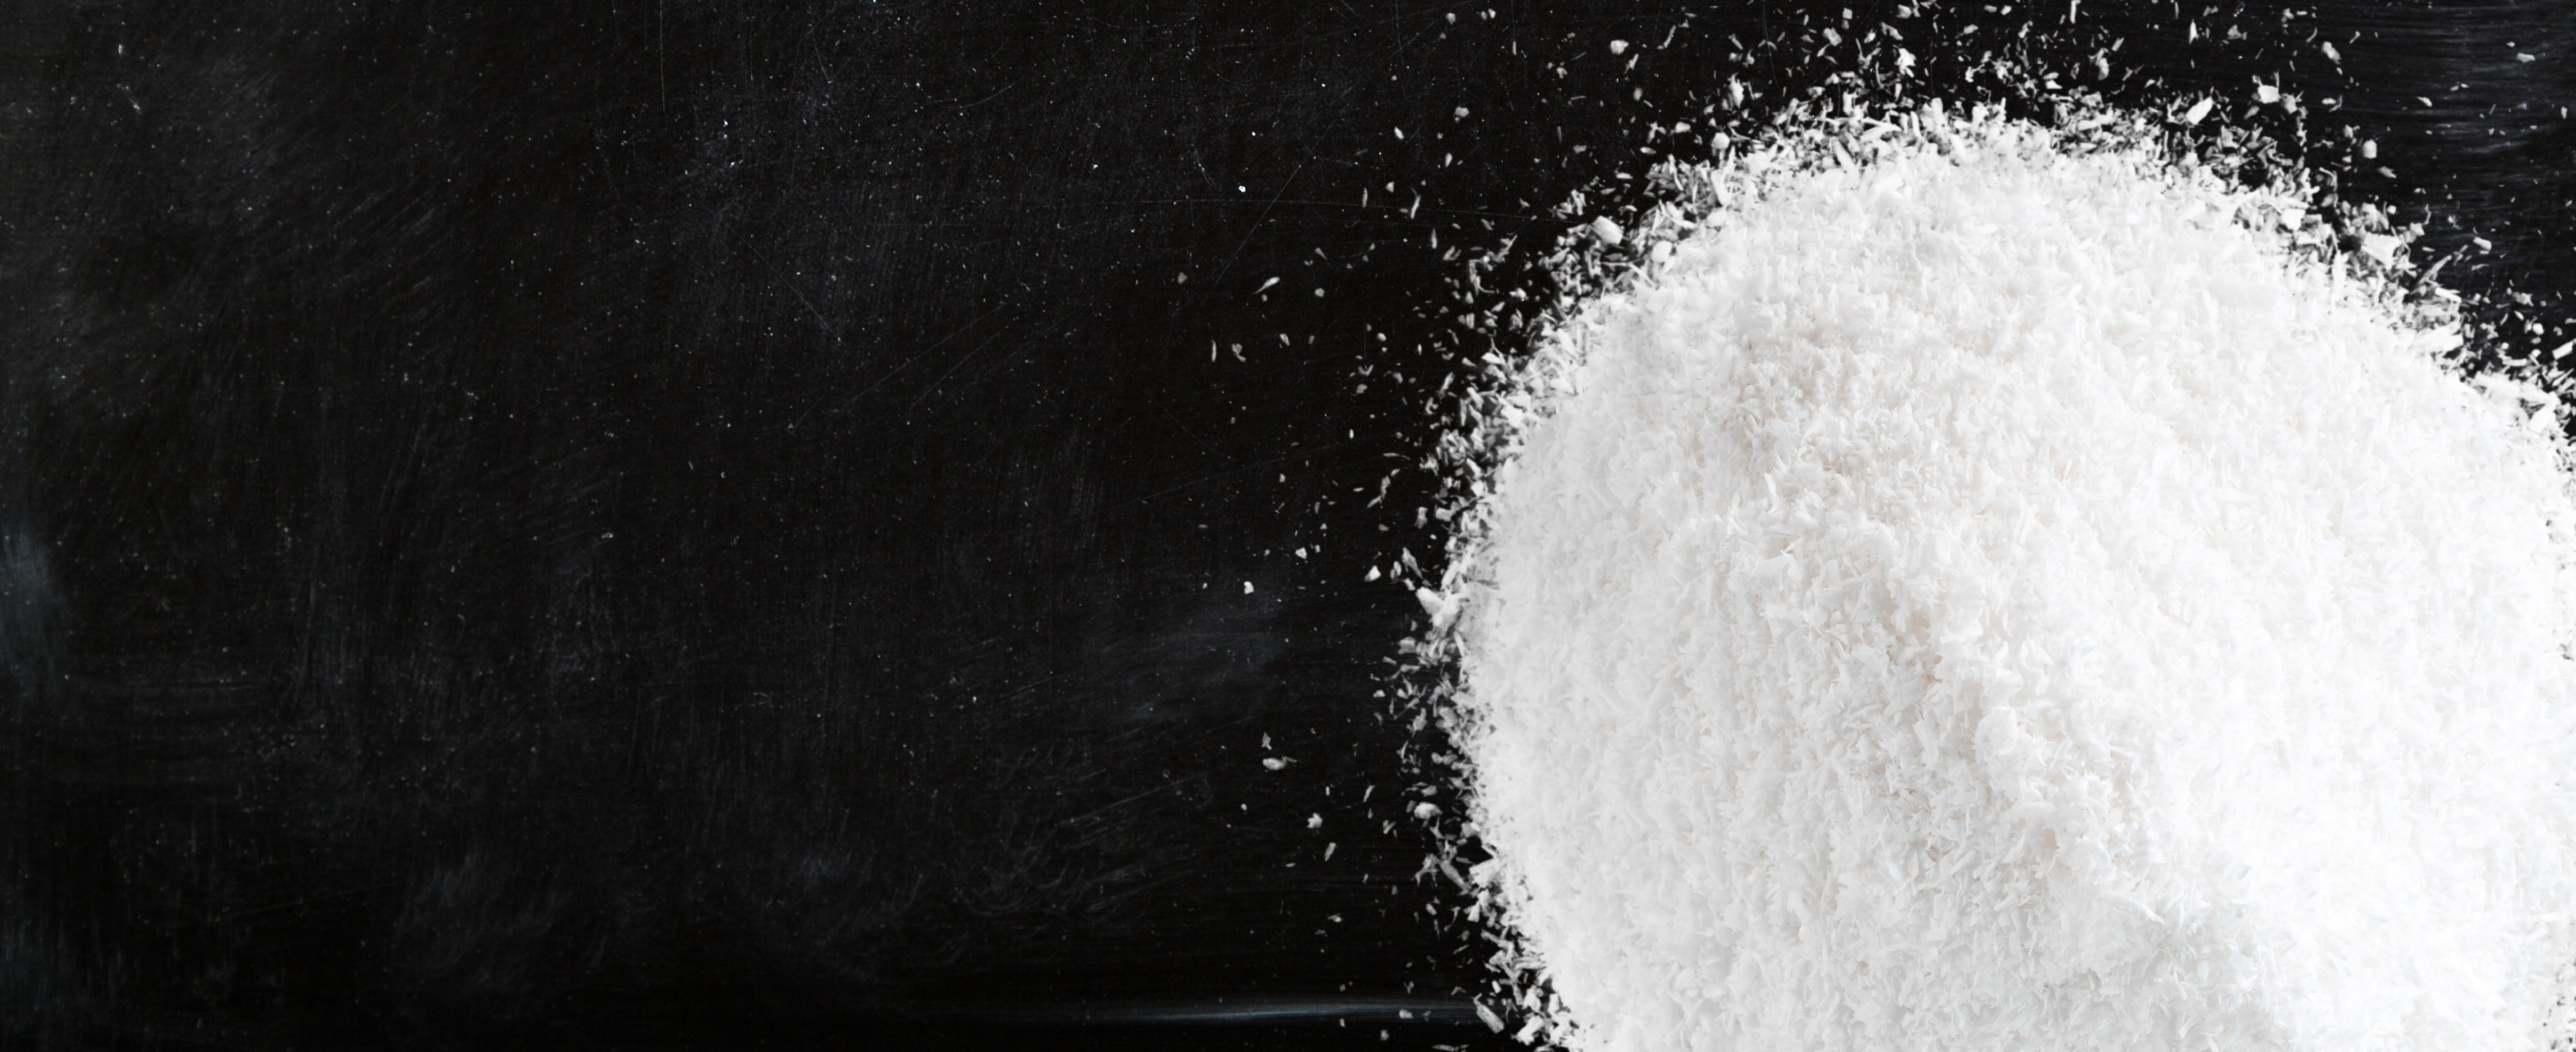 Titanium dioxide: E171 no longer considered safe when used as a food  additive